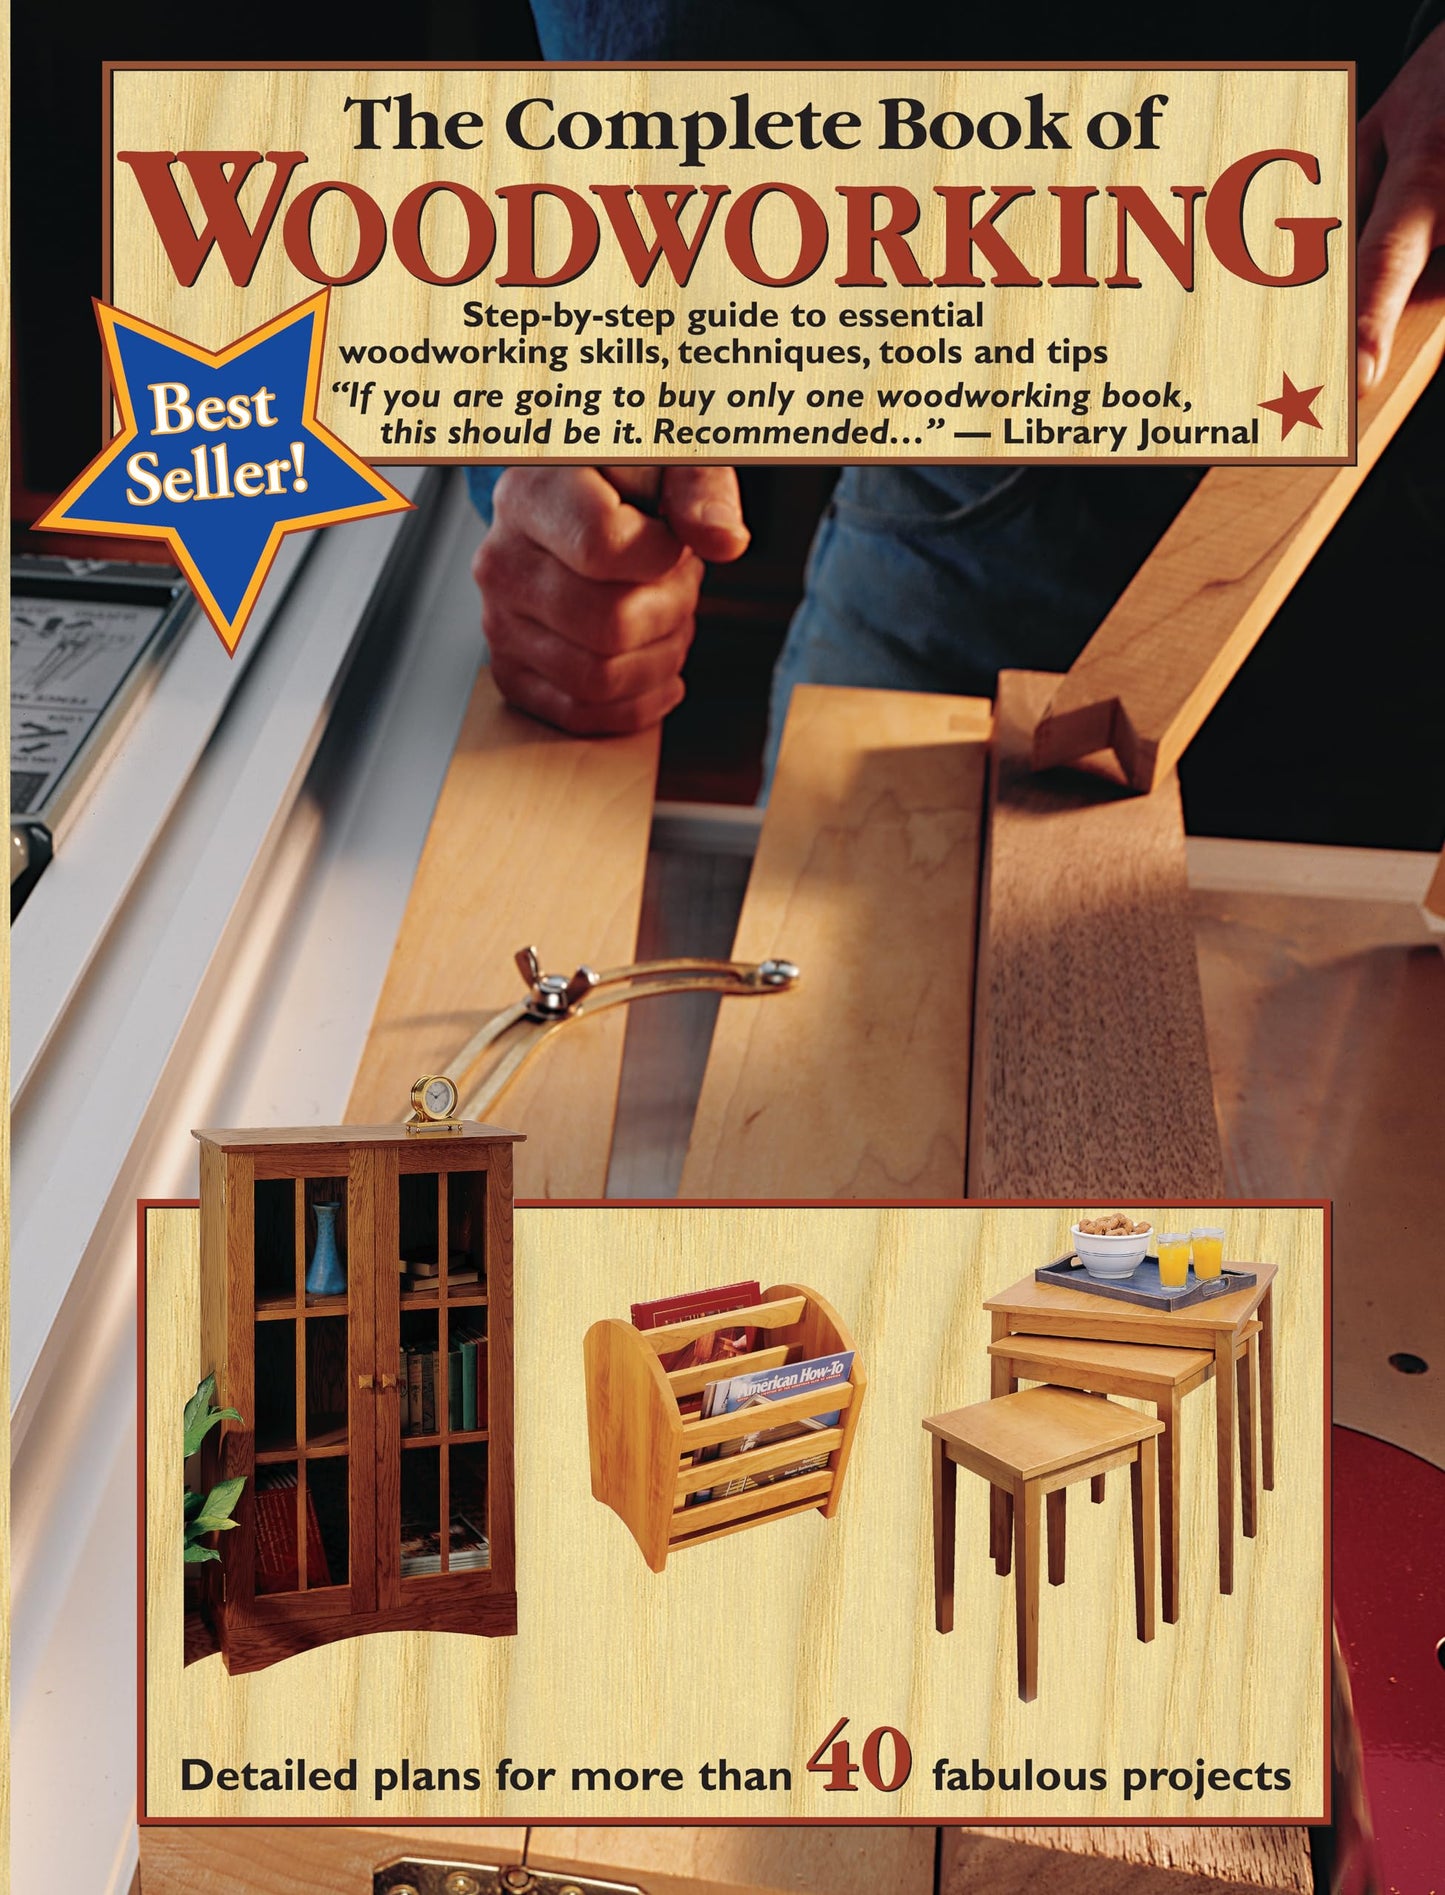 The Complete Book of Woodworking: Step-by-Step Guide to Essential Woodworking Skills, Techniques, Tools and Tips (Landauer) Over 40 Easy-to-Follow